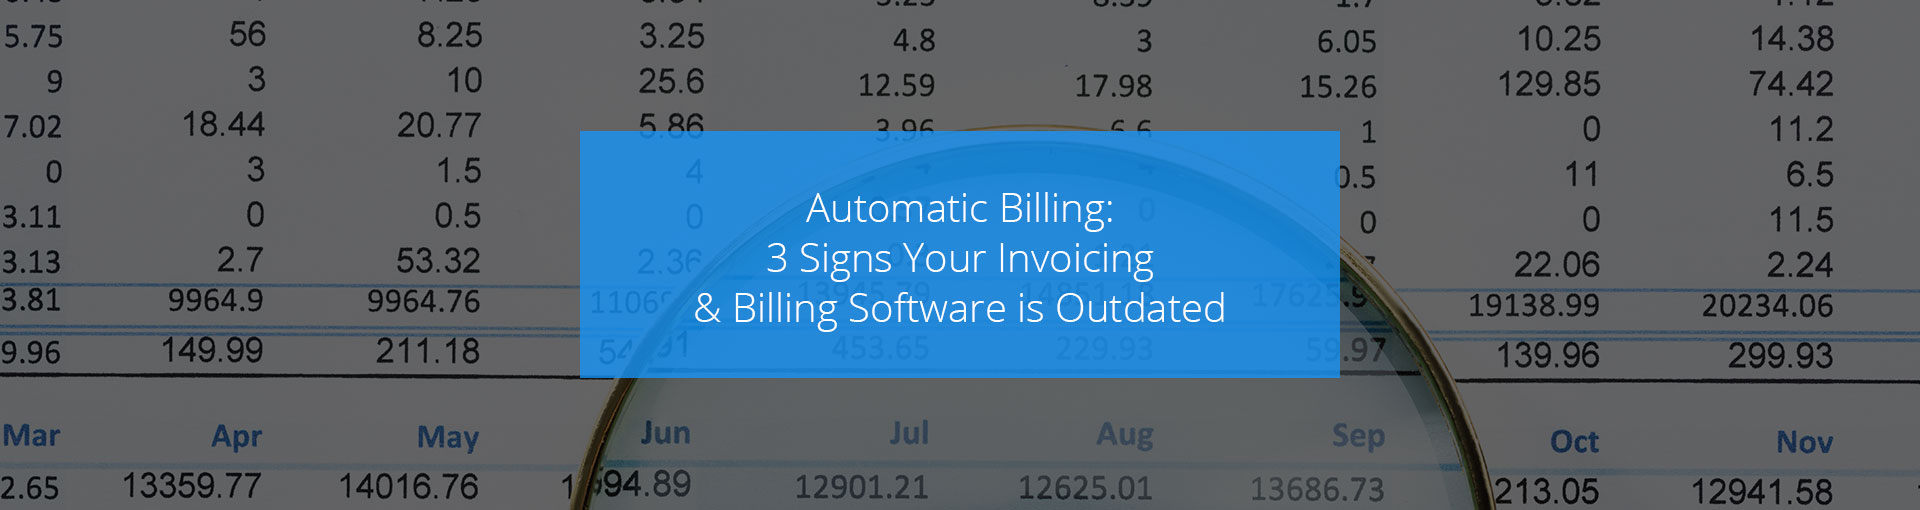 Automatic Billing: 3 Signs Your Invoicing & Billing Software is Outdated Featured Image